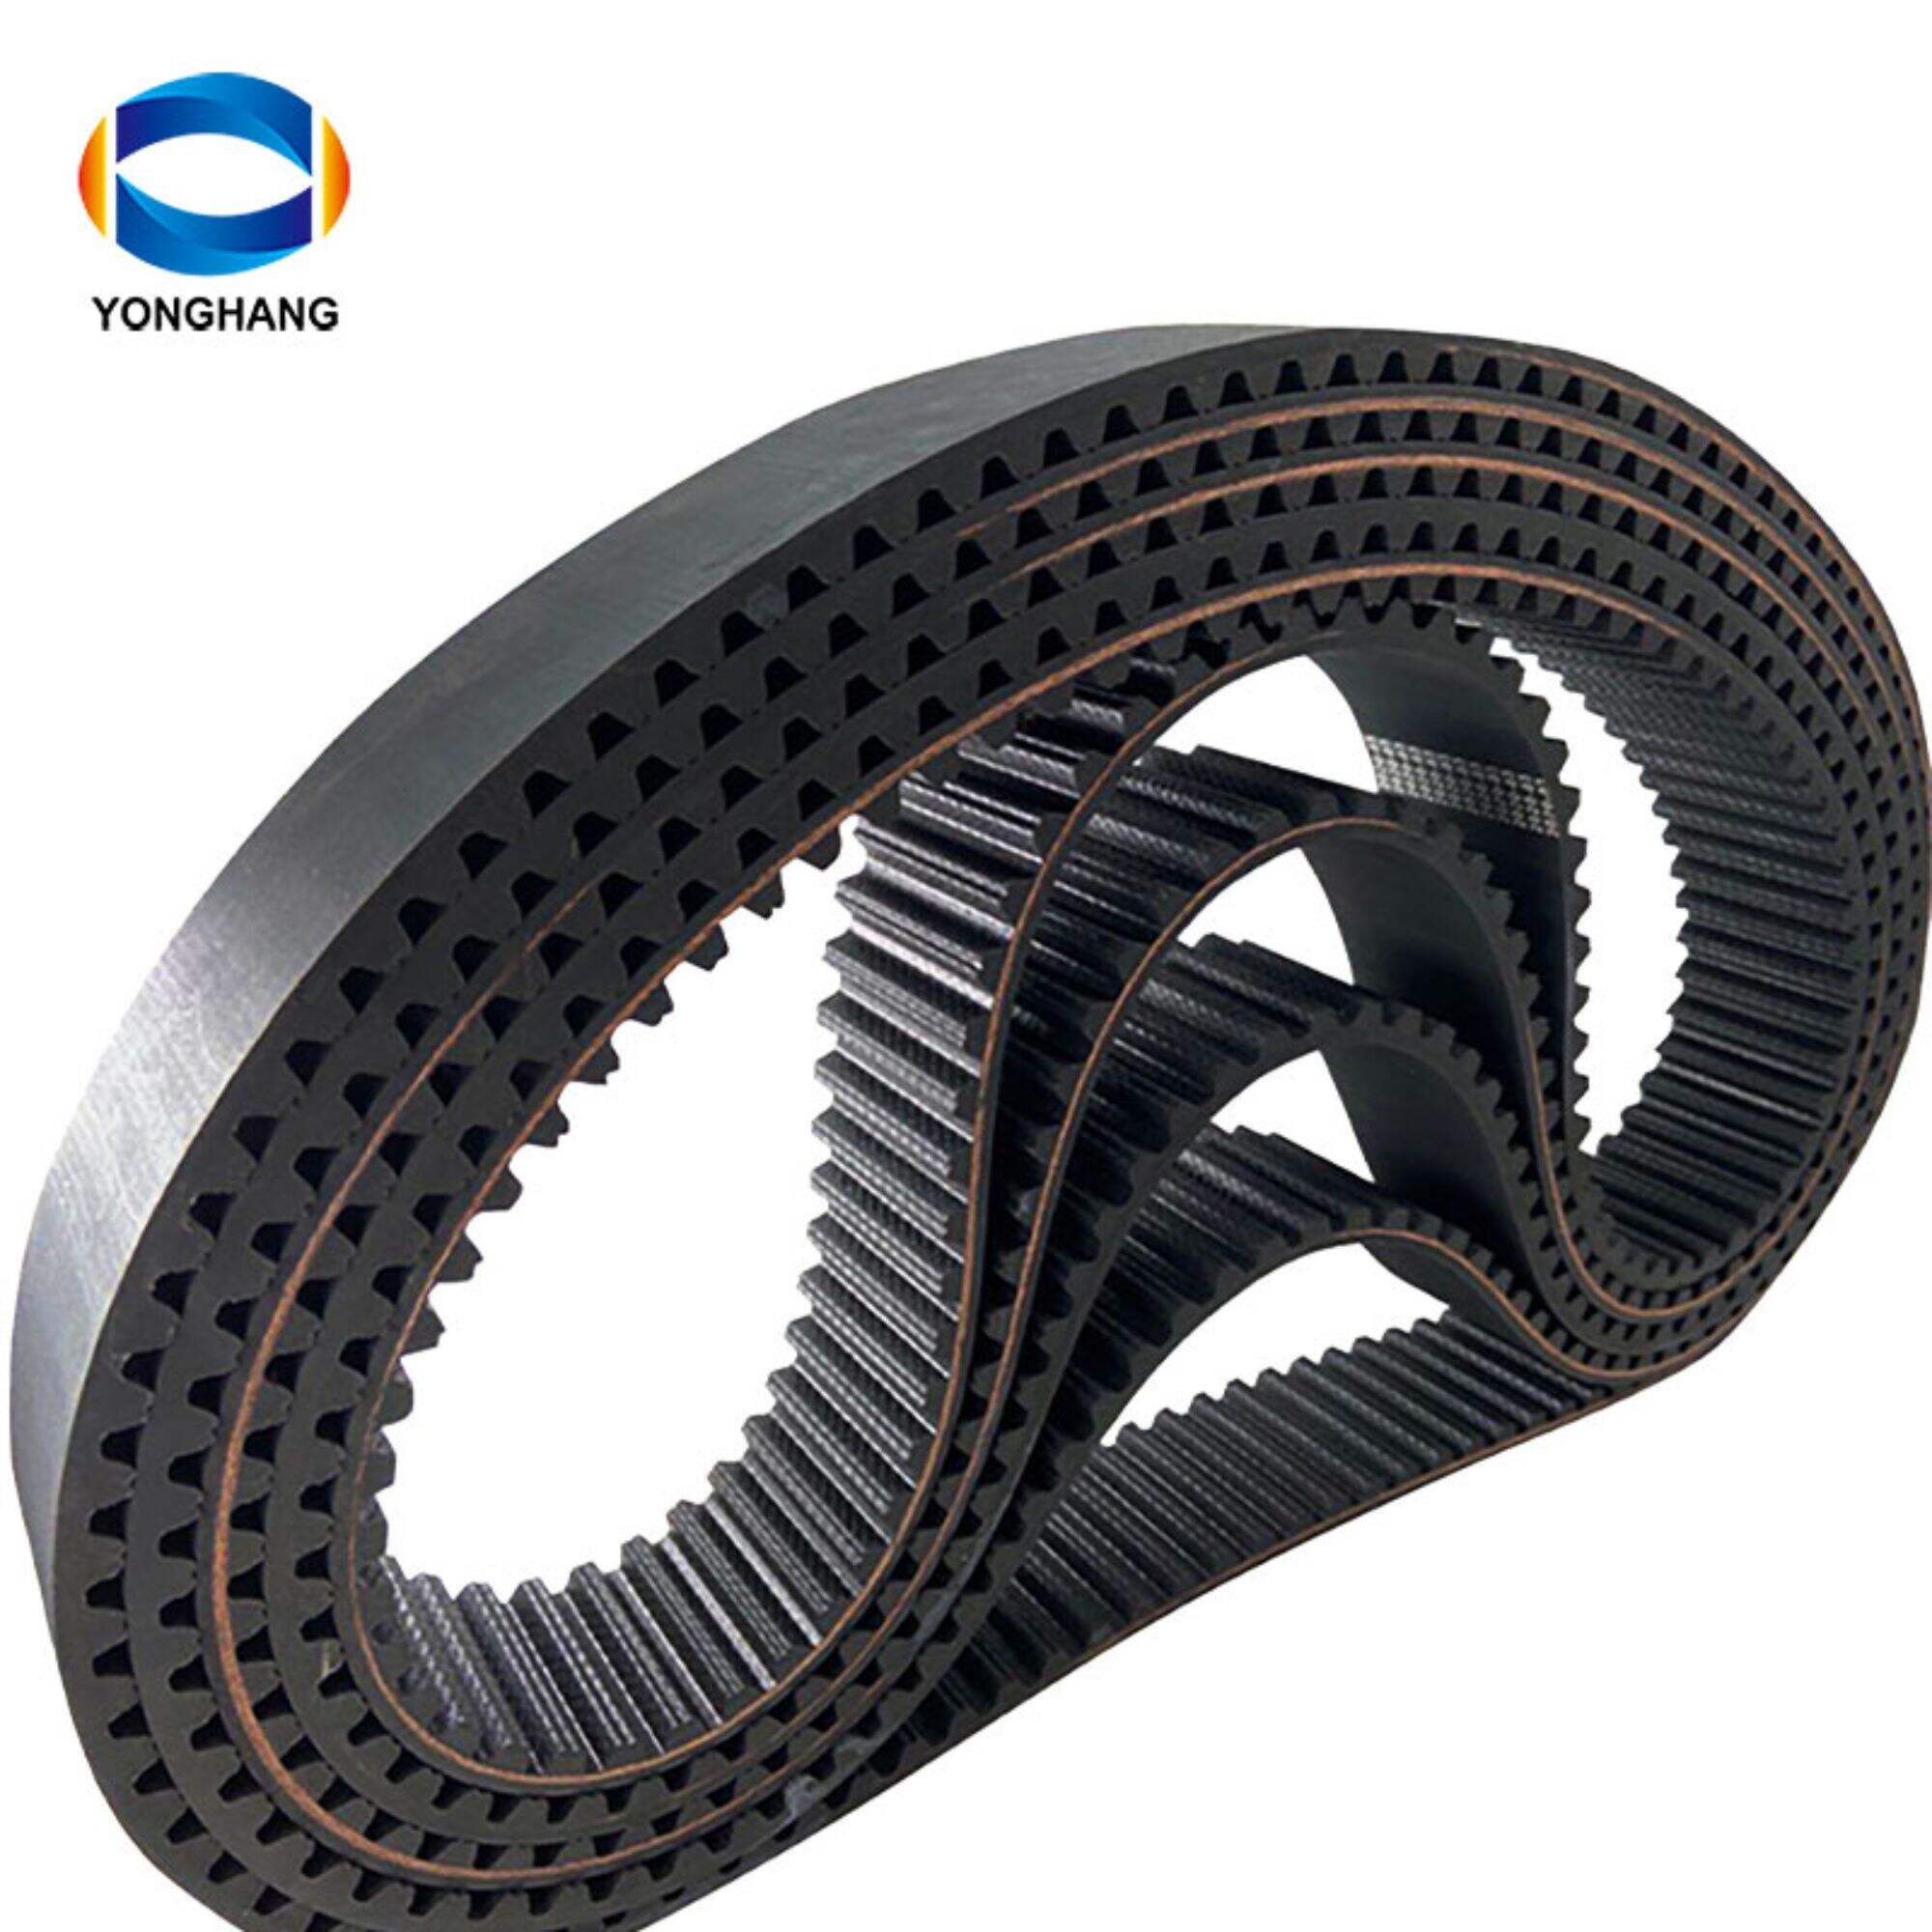 RPP8M Rubber Timing Belts